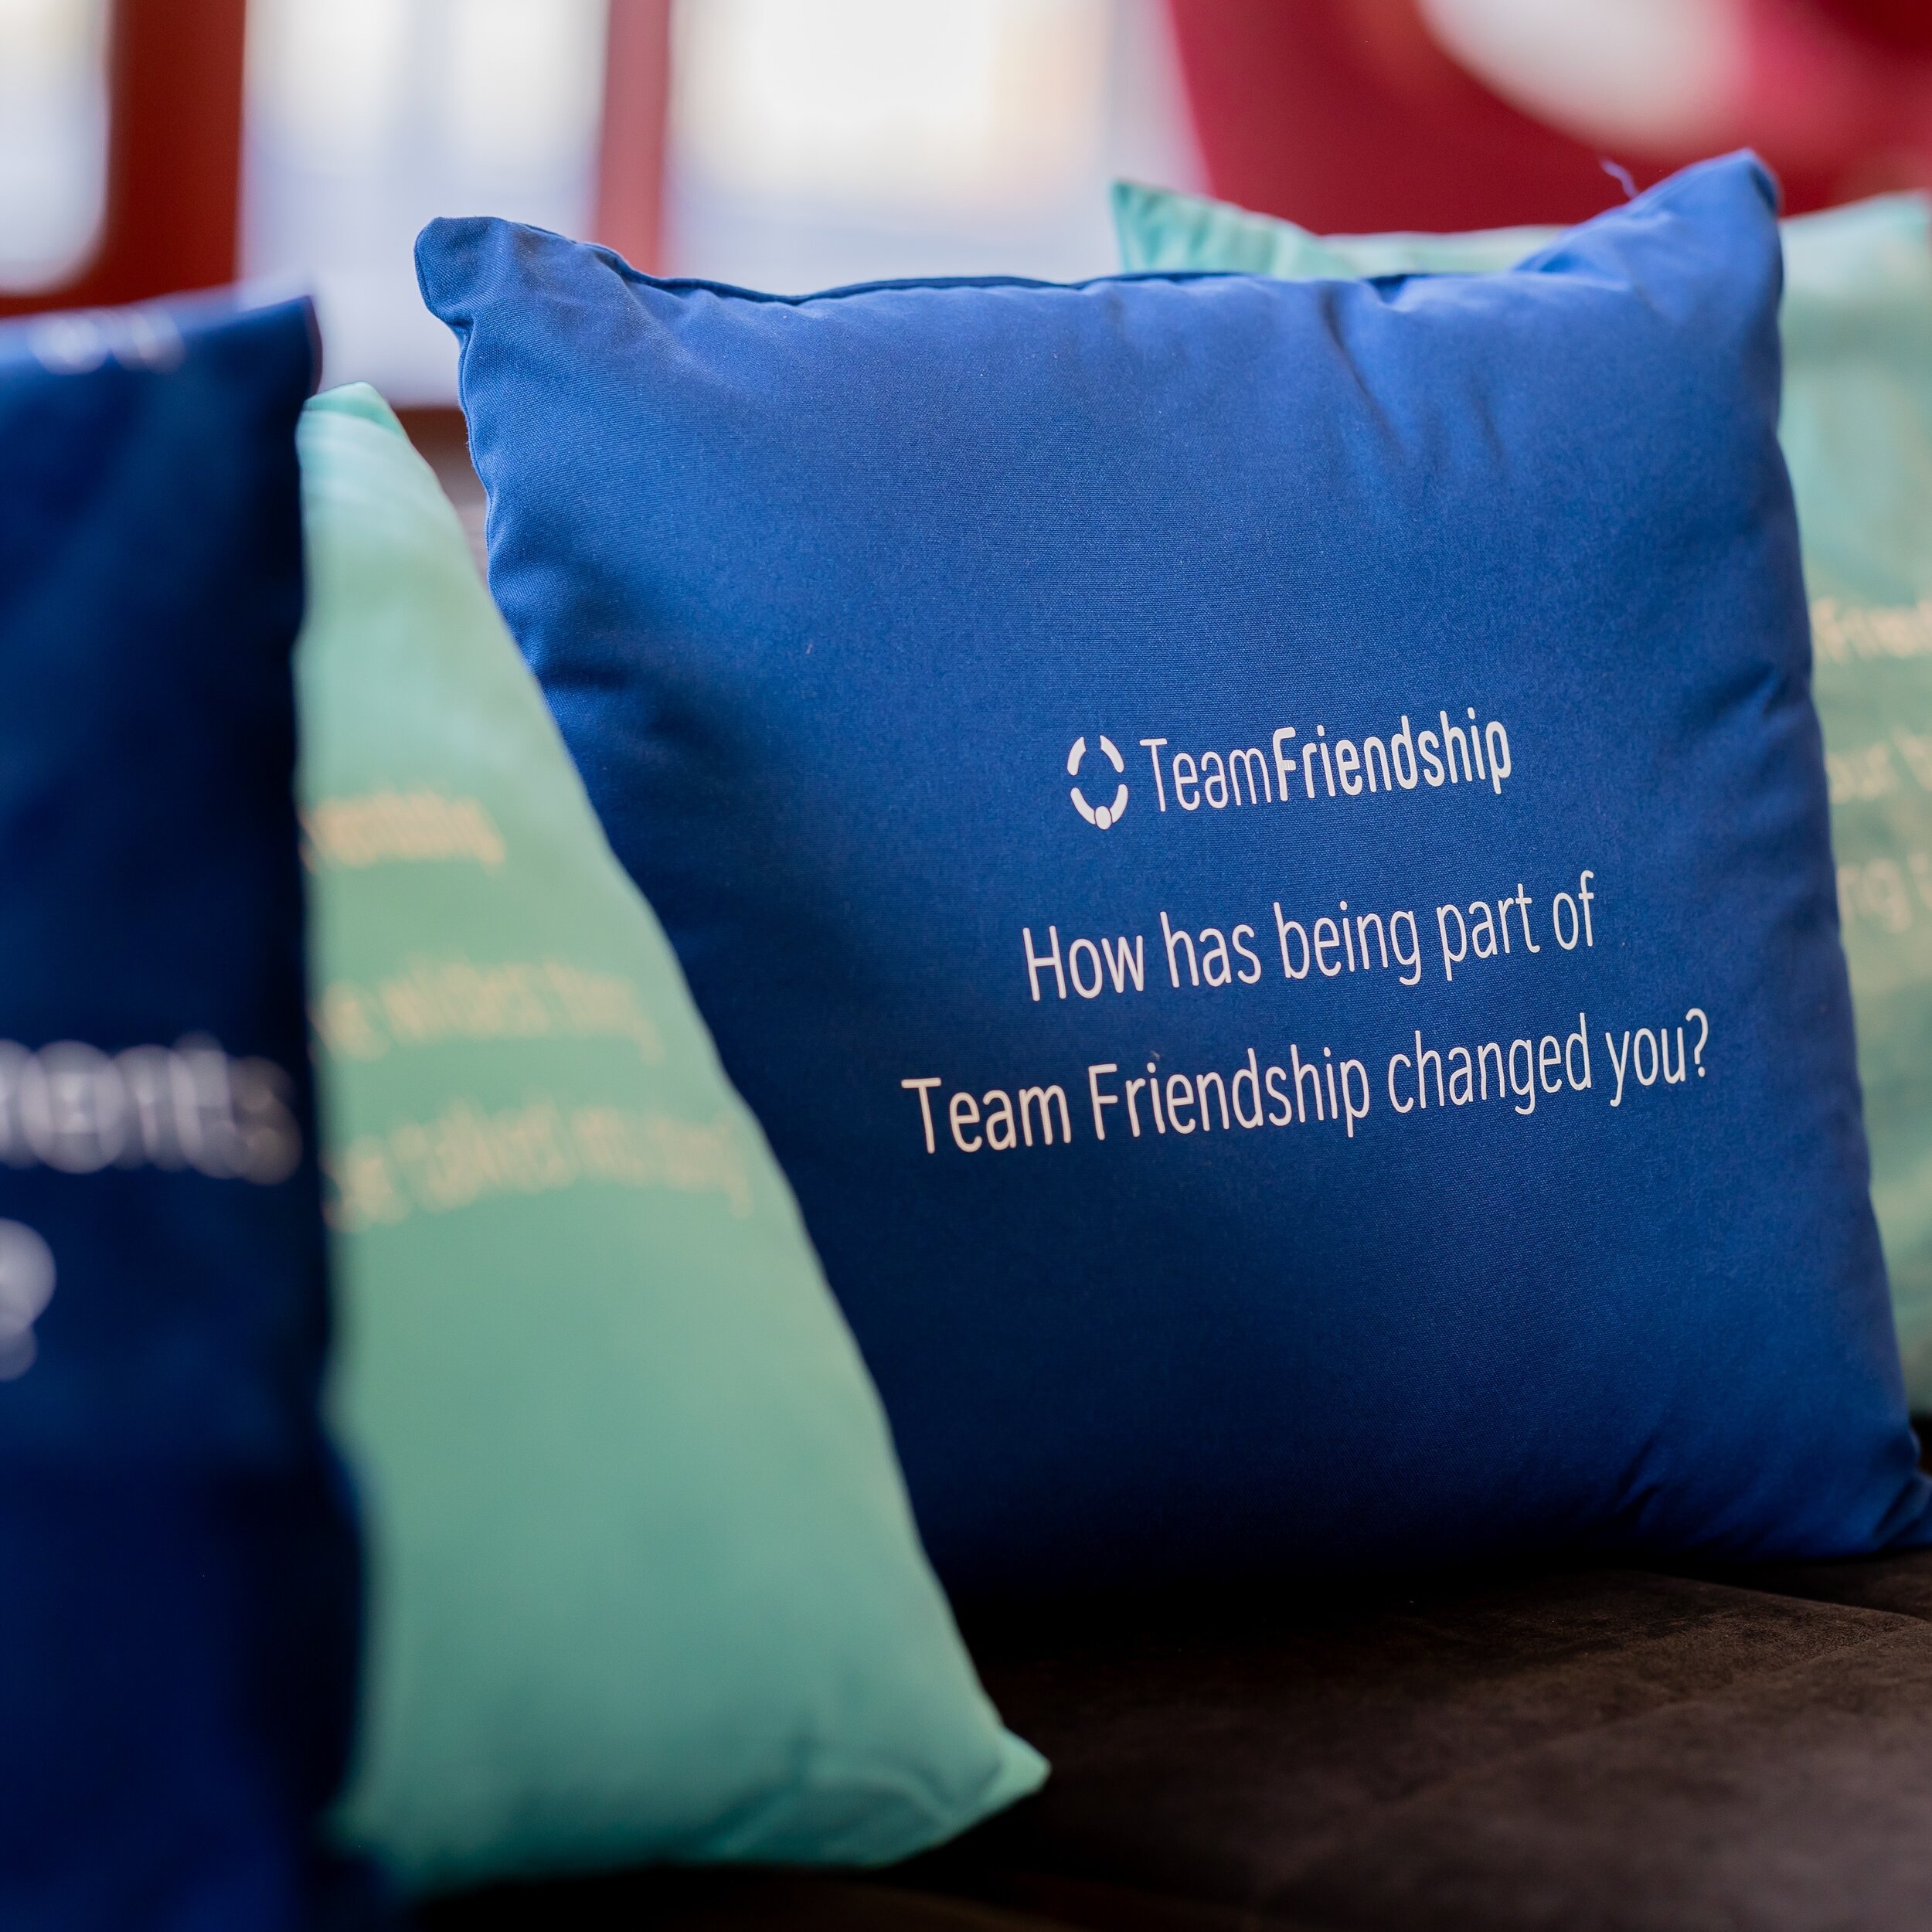 Adding conversational pillows to your decor is an excellent way to &ldquo;break the ice&rdquo; and start making new friends! #atxeventplanner #austineventplanner #atxevents #atxeventspaces #atx